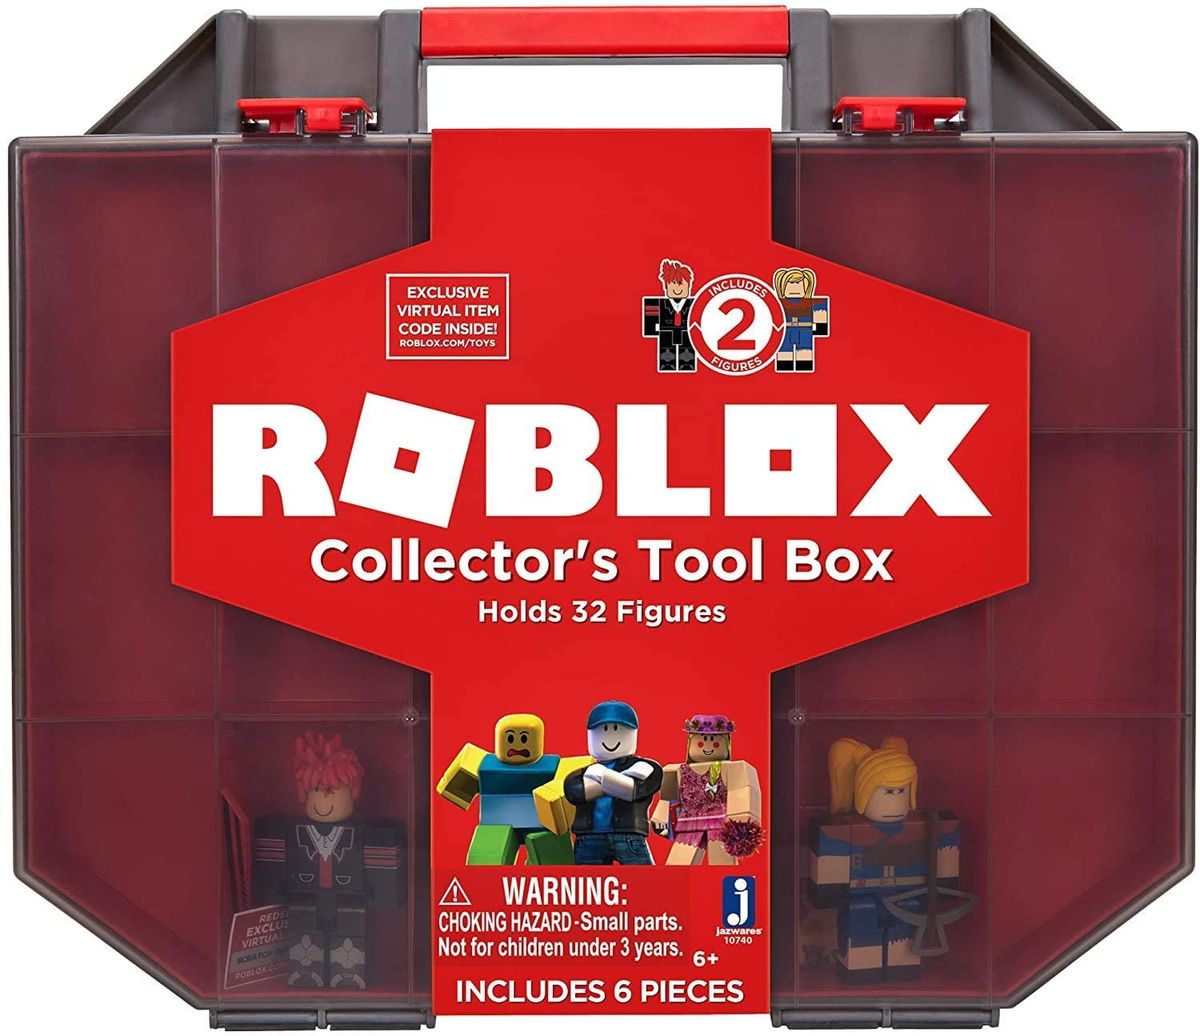 Best Prime Day Toy Deals 2020 The Best Lego And Stem Sets Marvel And Funko Figures And More Techradar - amazon com roblox series 3 the beast action figure mystery box